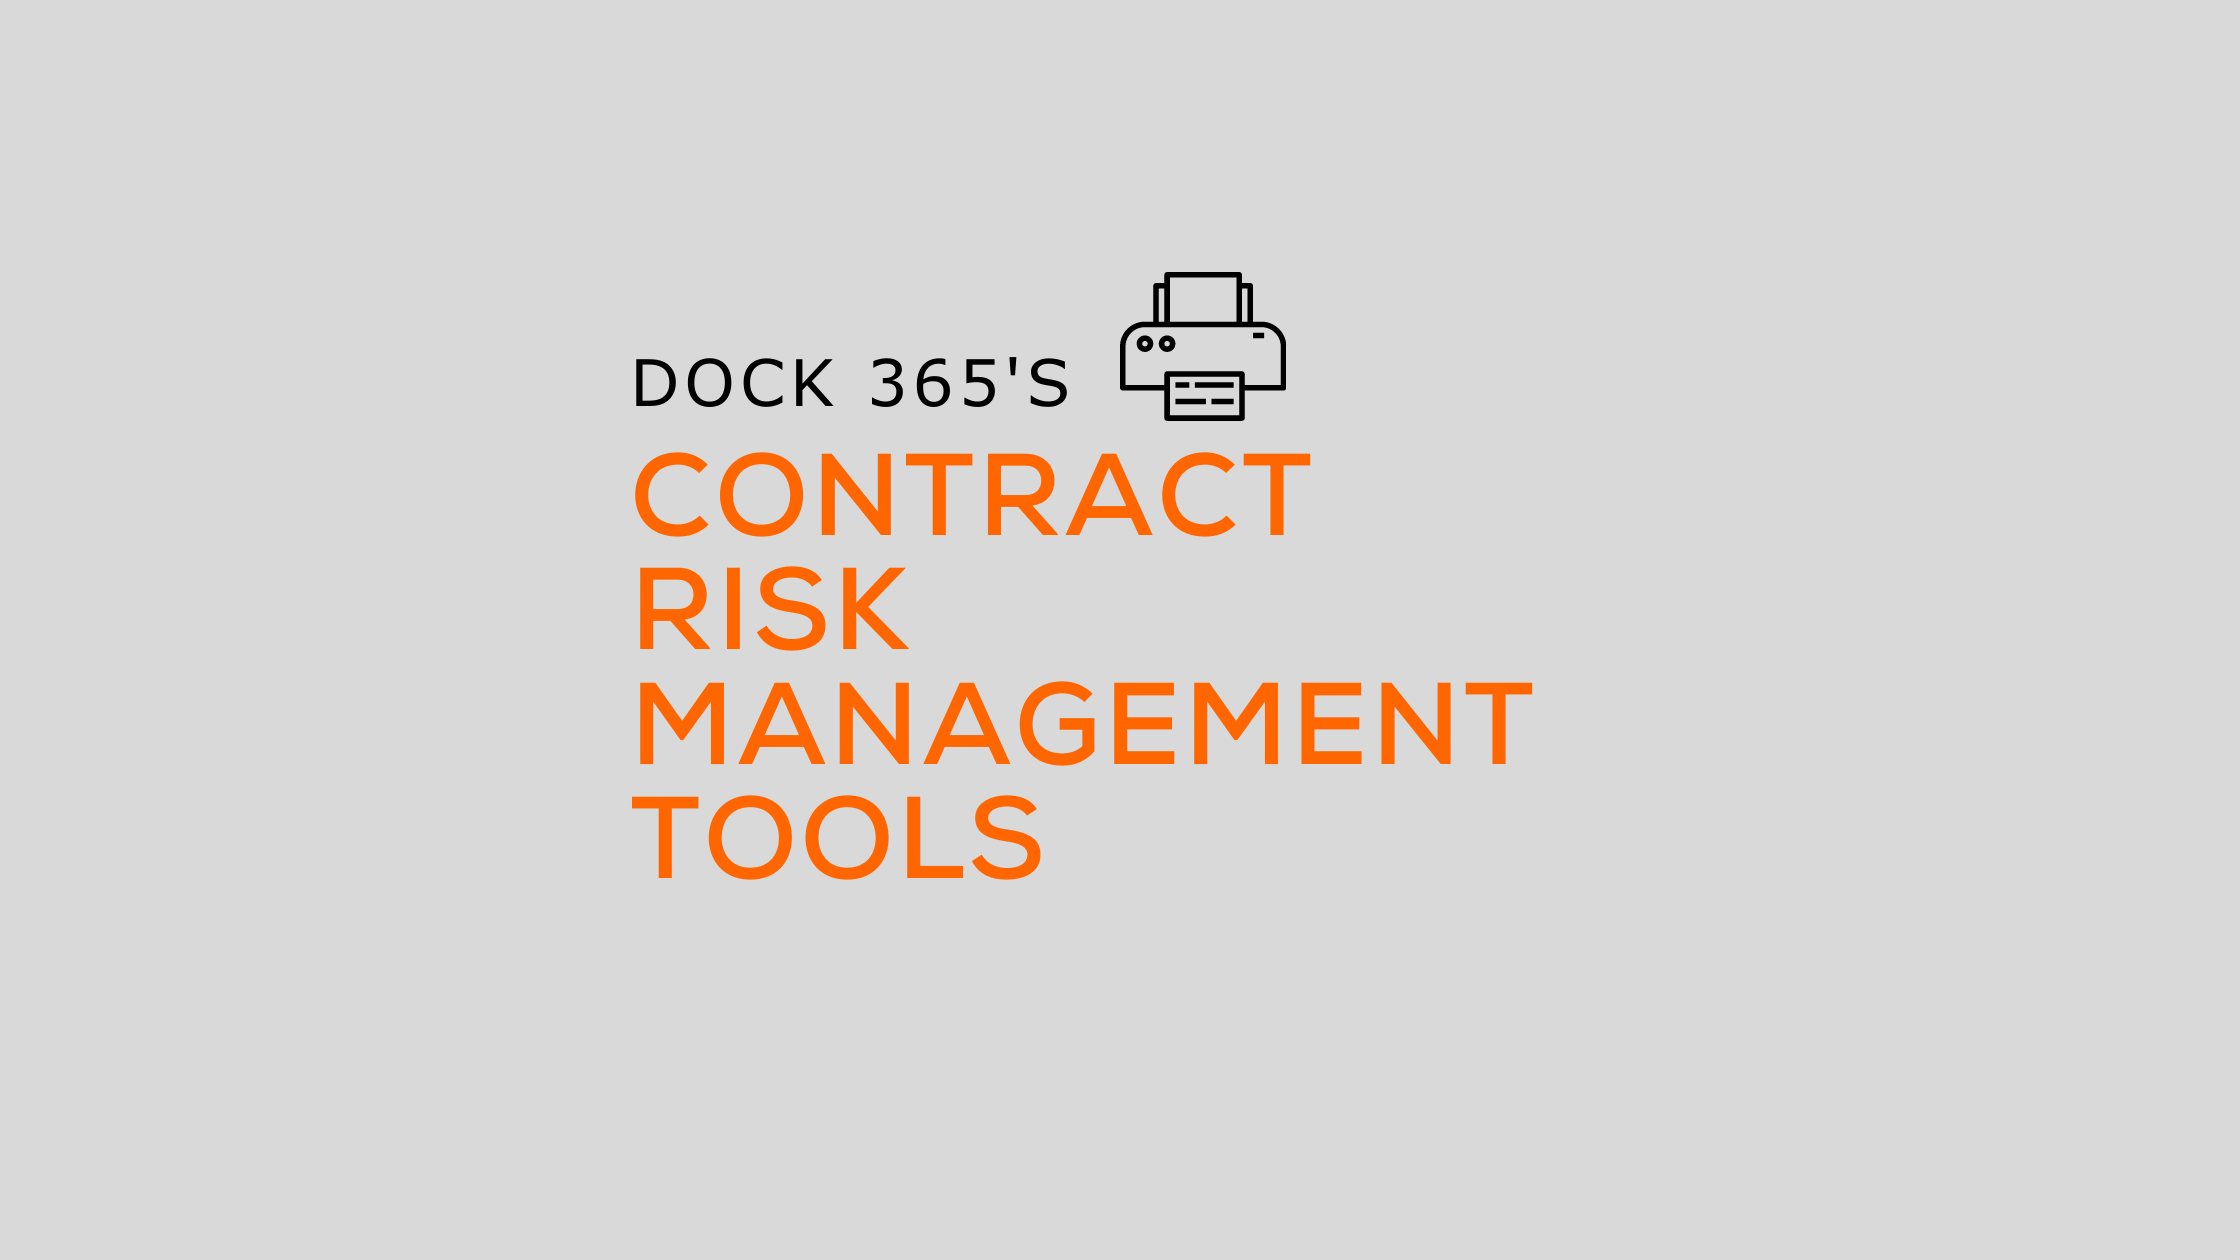 Top Contract Management Tools To Use To Reduce Contractual Risk